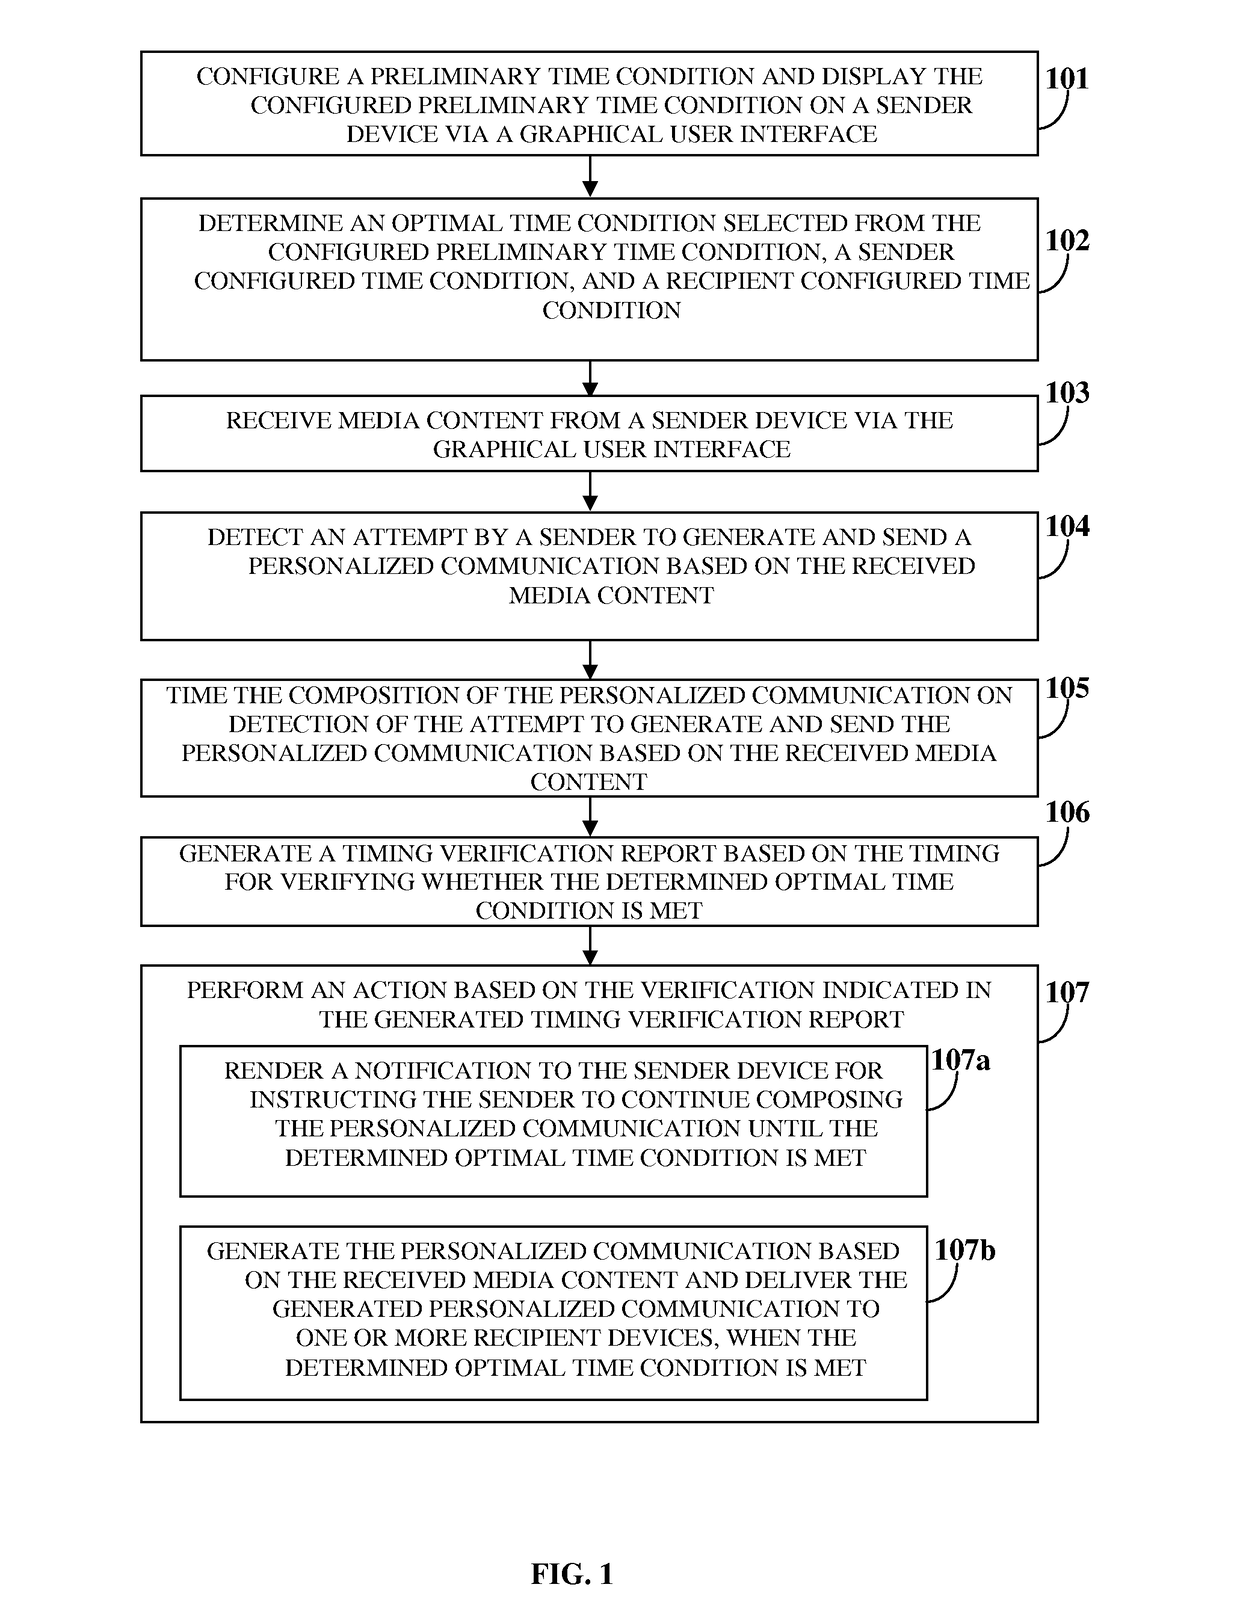 Personal communication system for generating and delivering a personalized communication based on a time condition